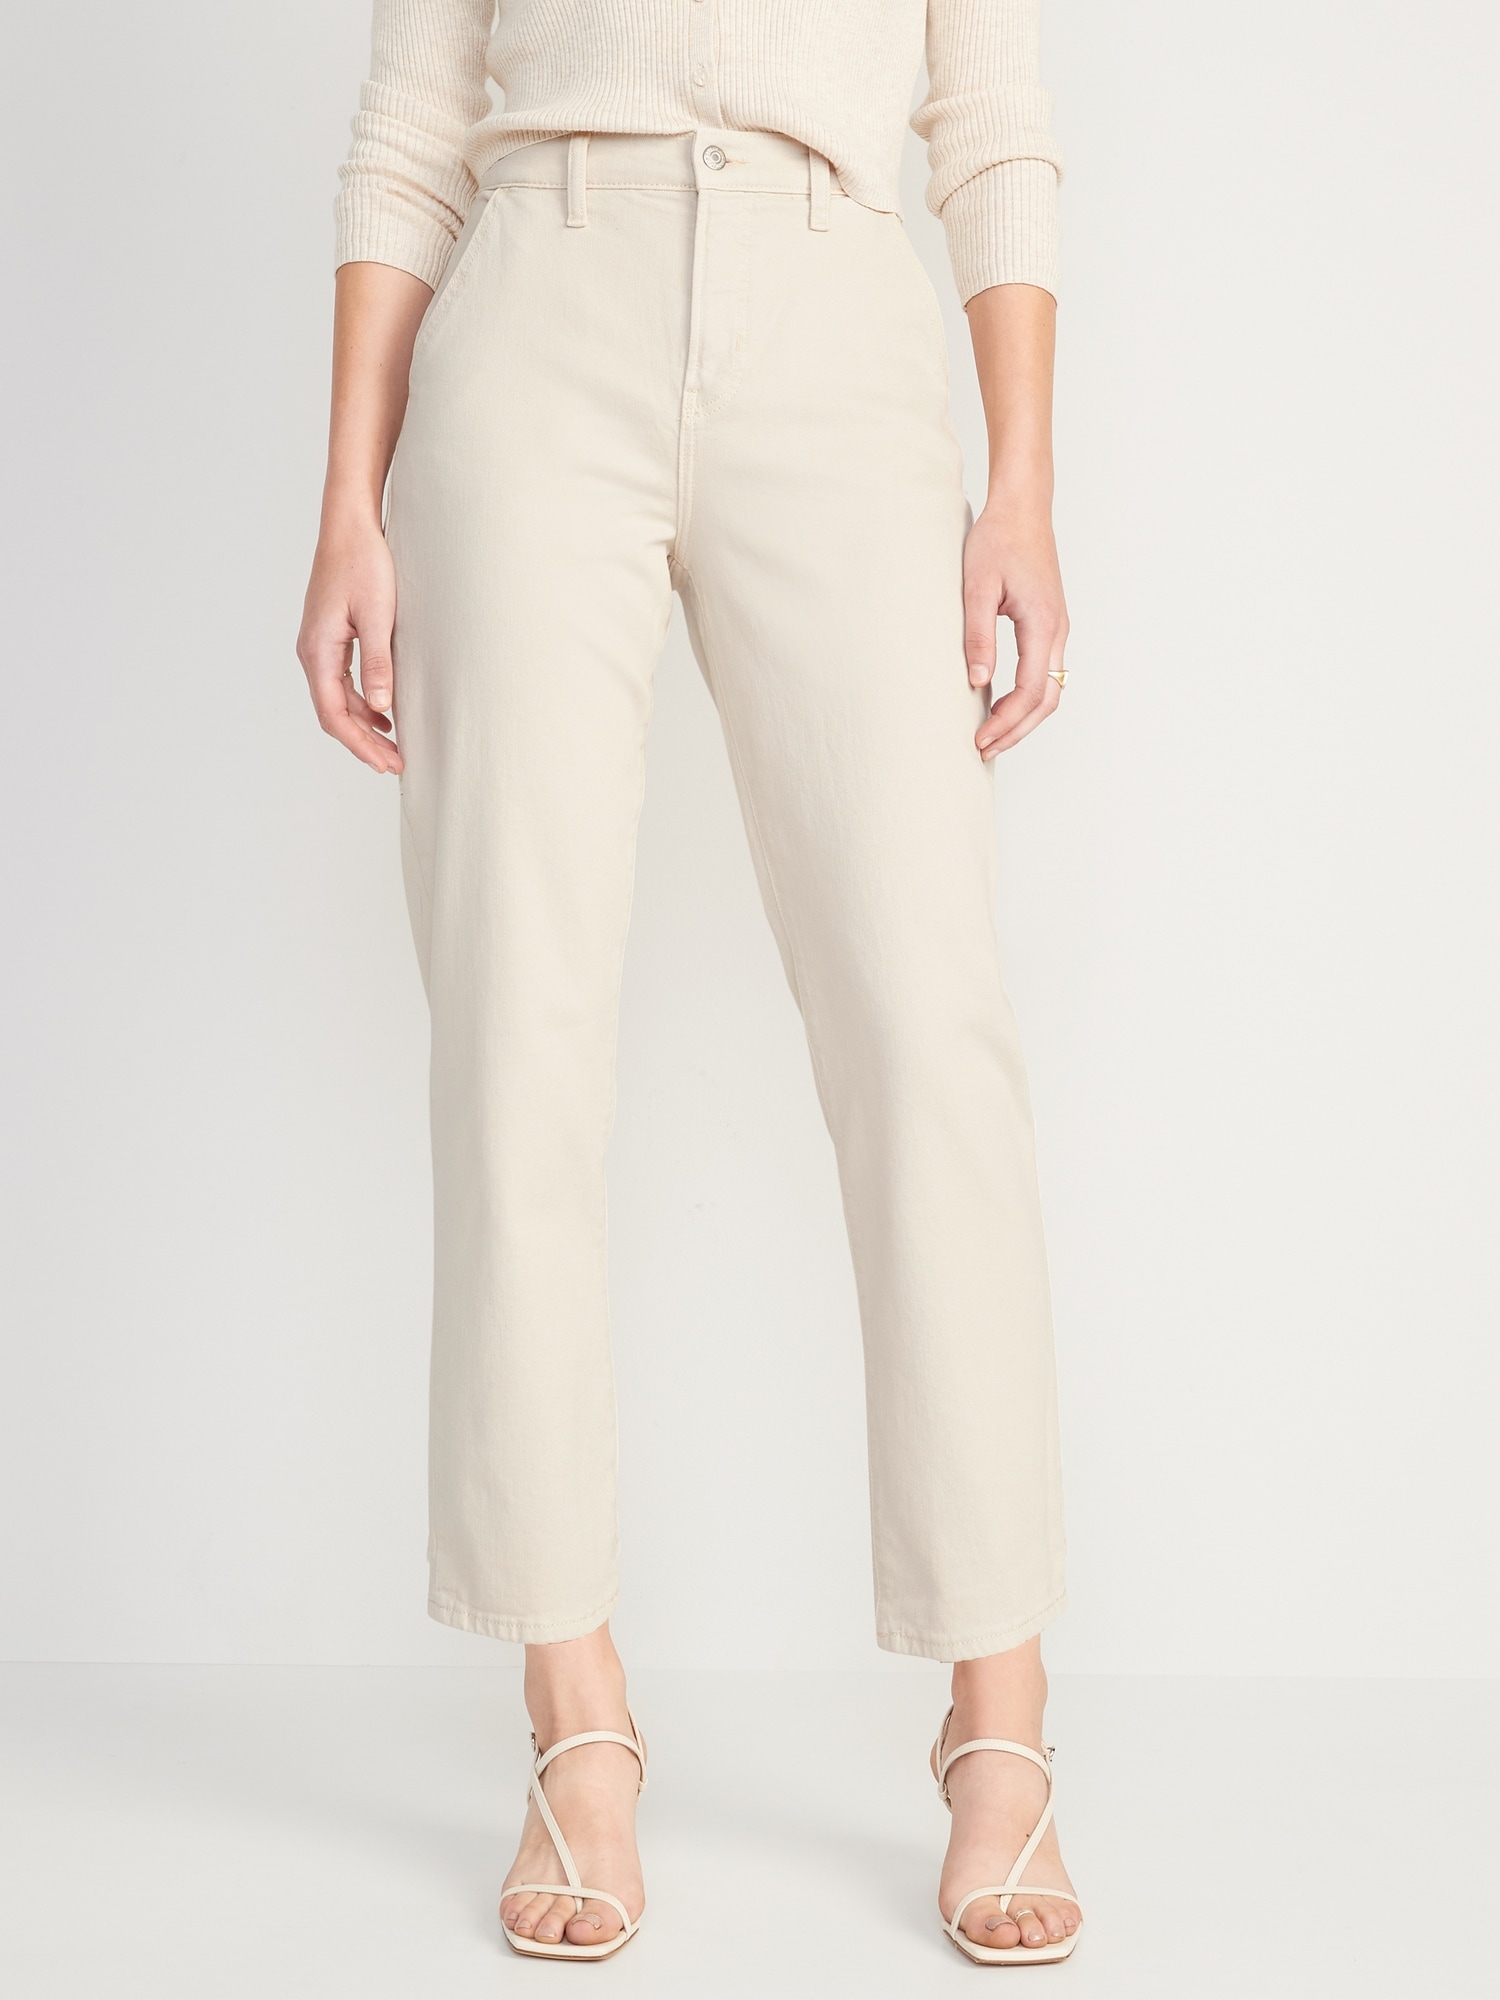 Extra High-Waisted Sky-Hi Straight Workwear Jeans for Women | Old Navy